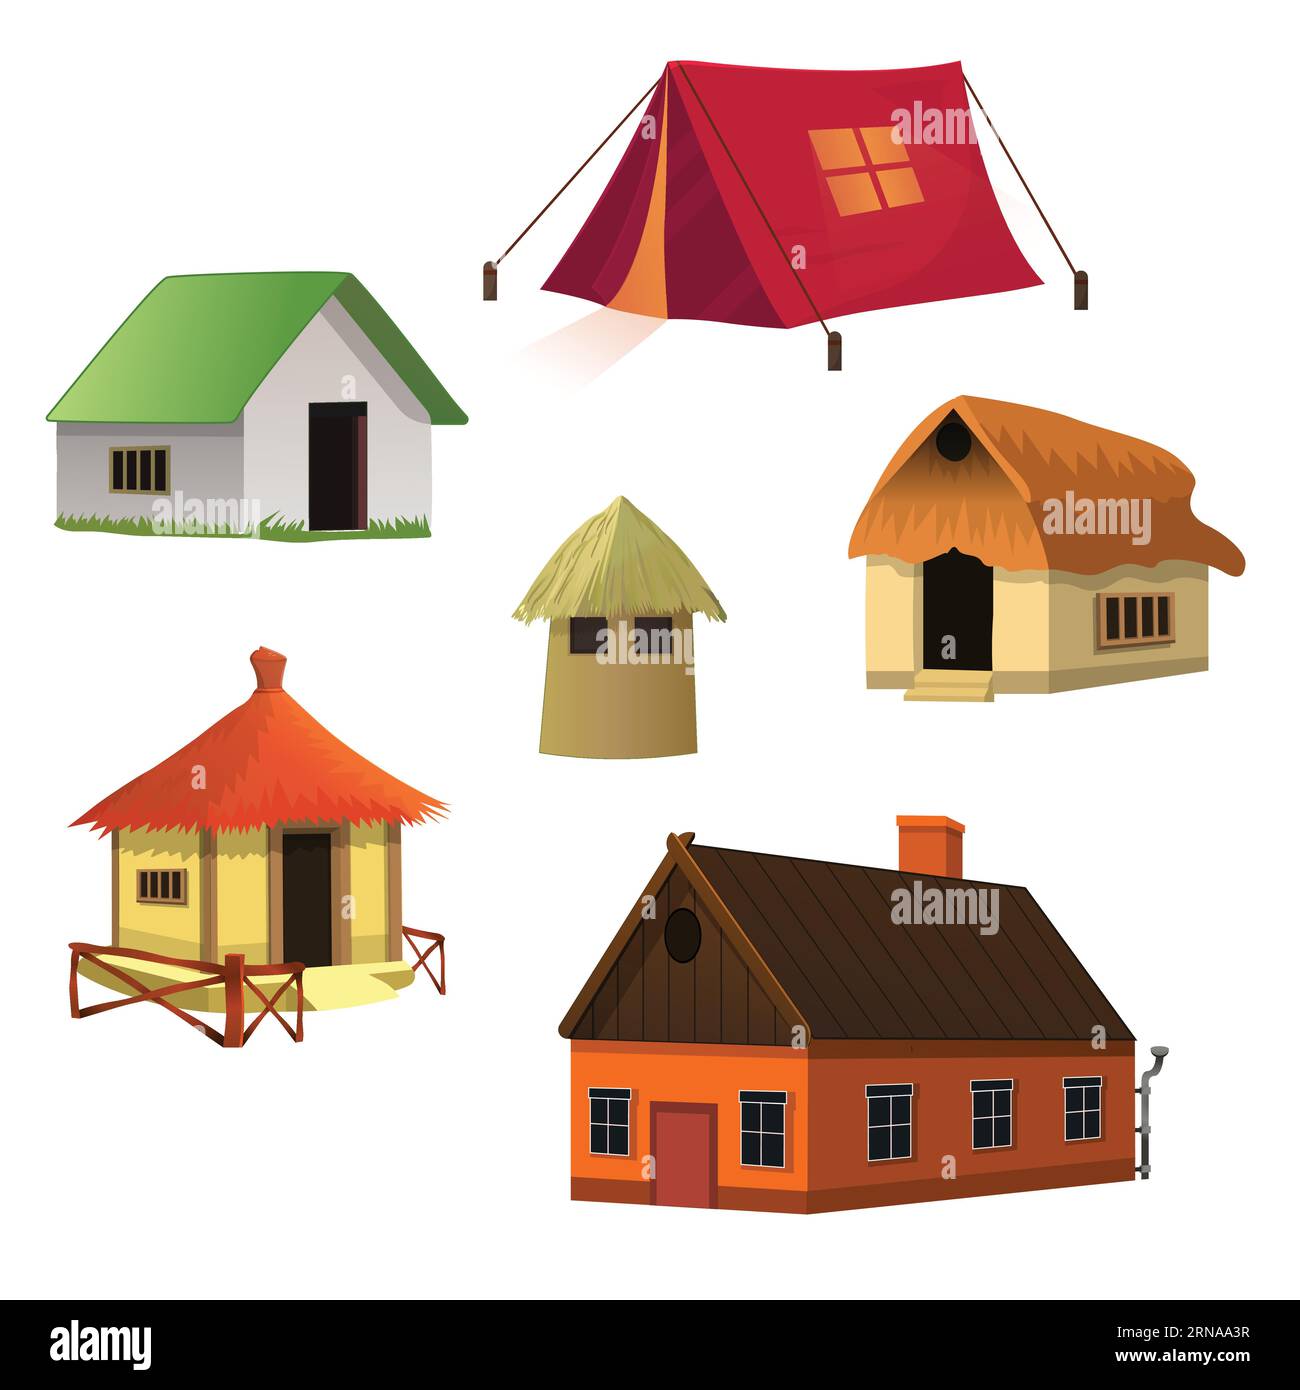 Different types of humans shelter, vector illustration Stock Vector